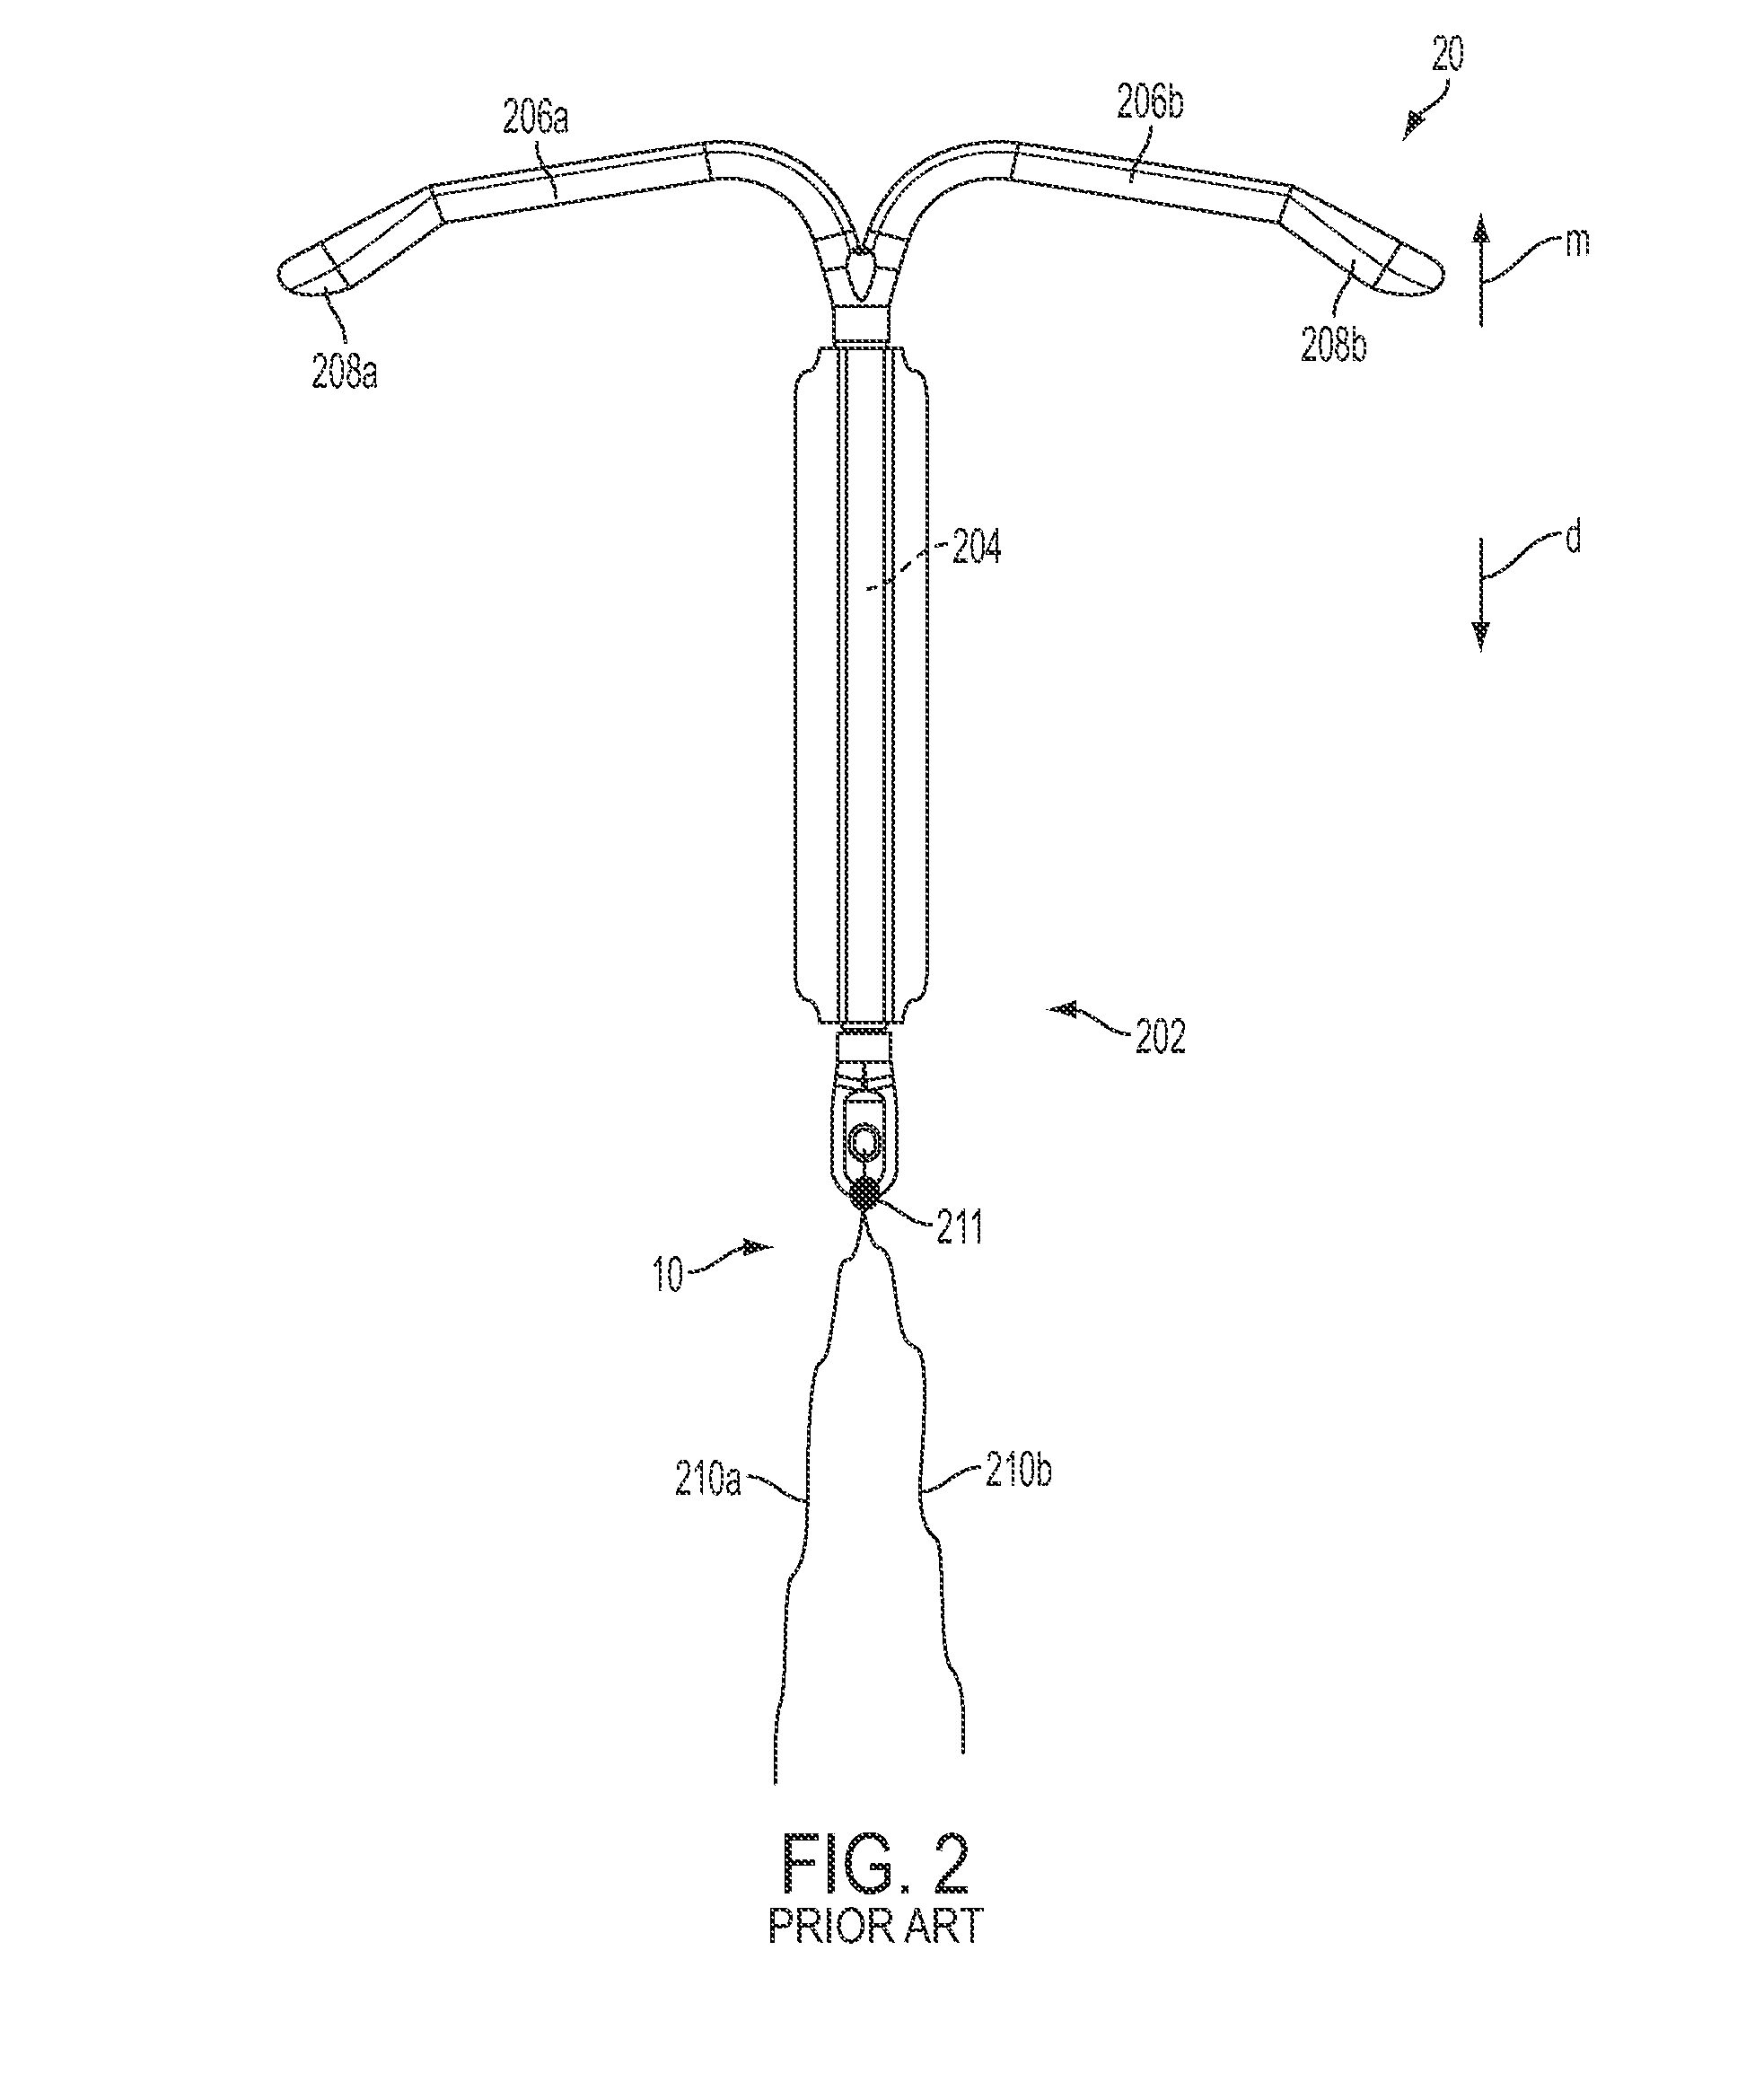 Intraurinary systems, iud insertion devices, and related methods and kits therefor